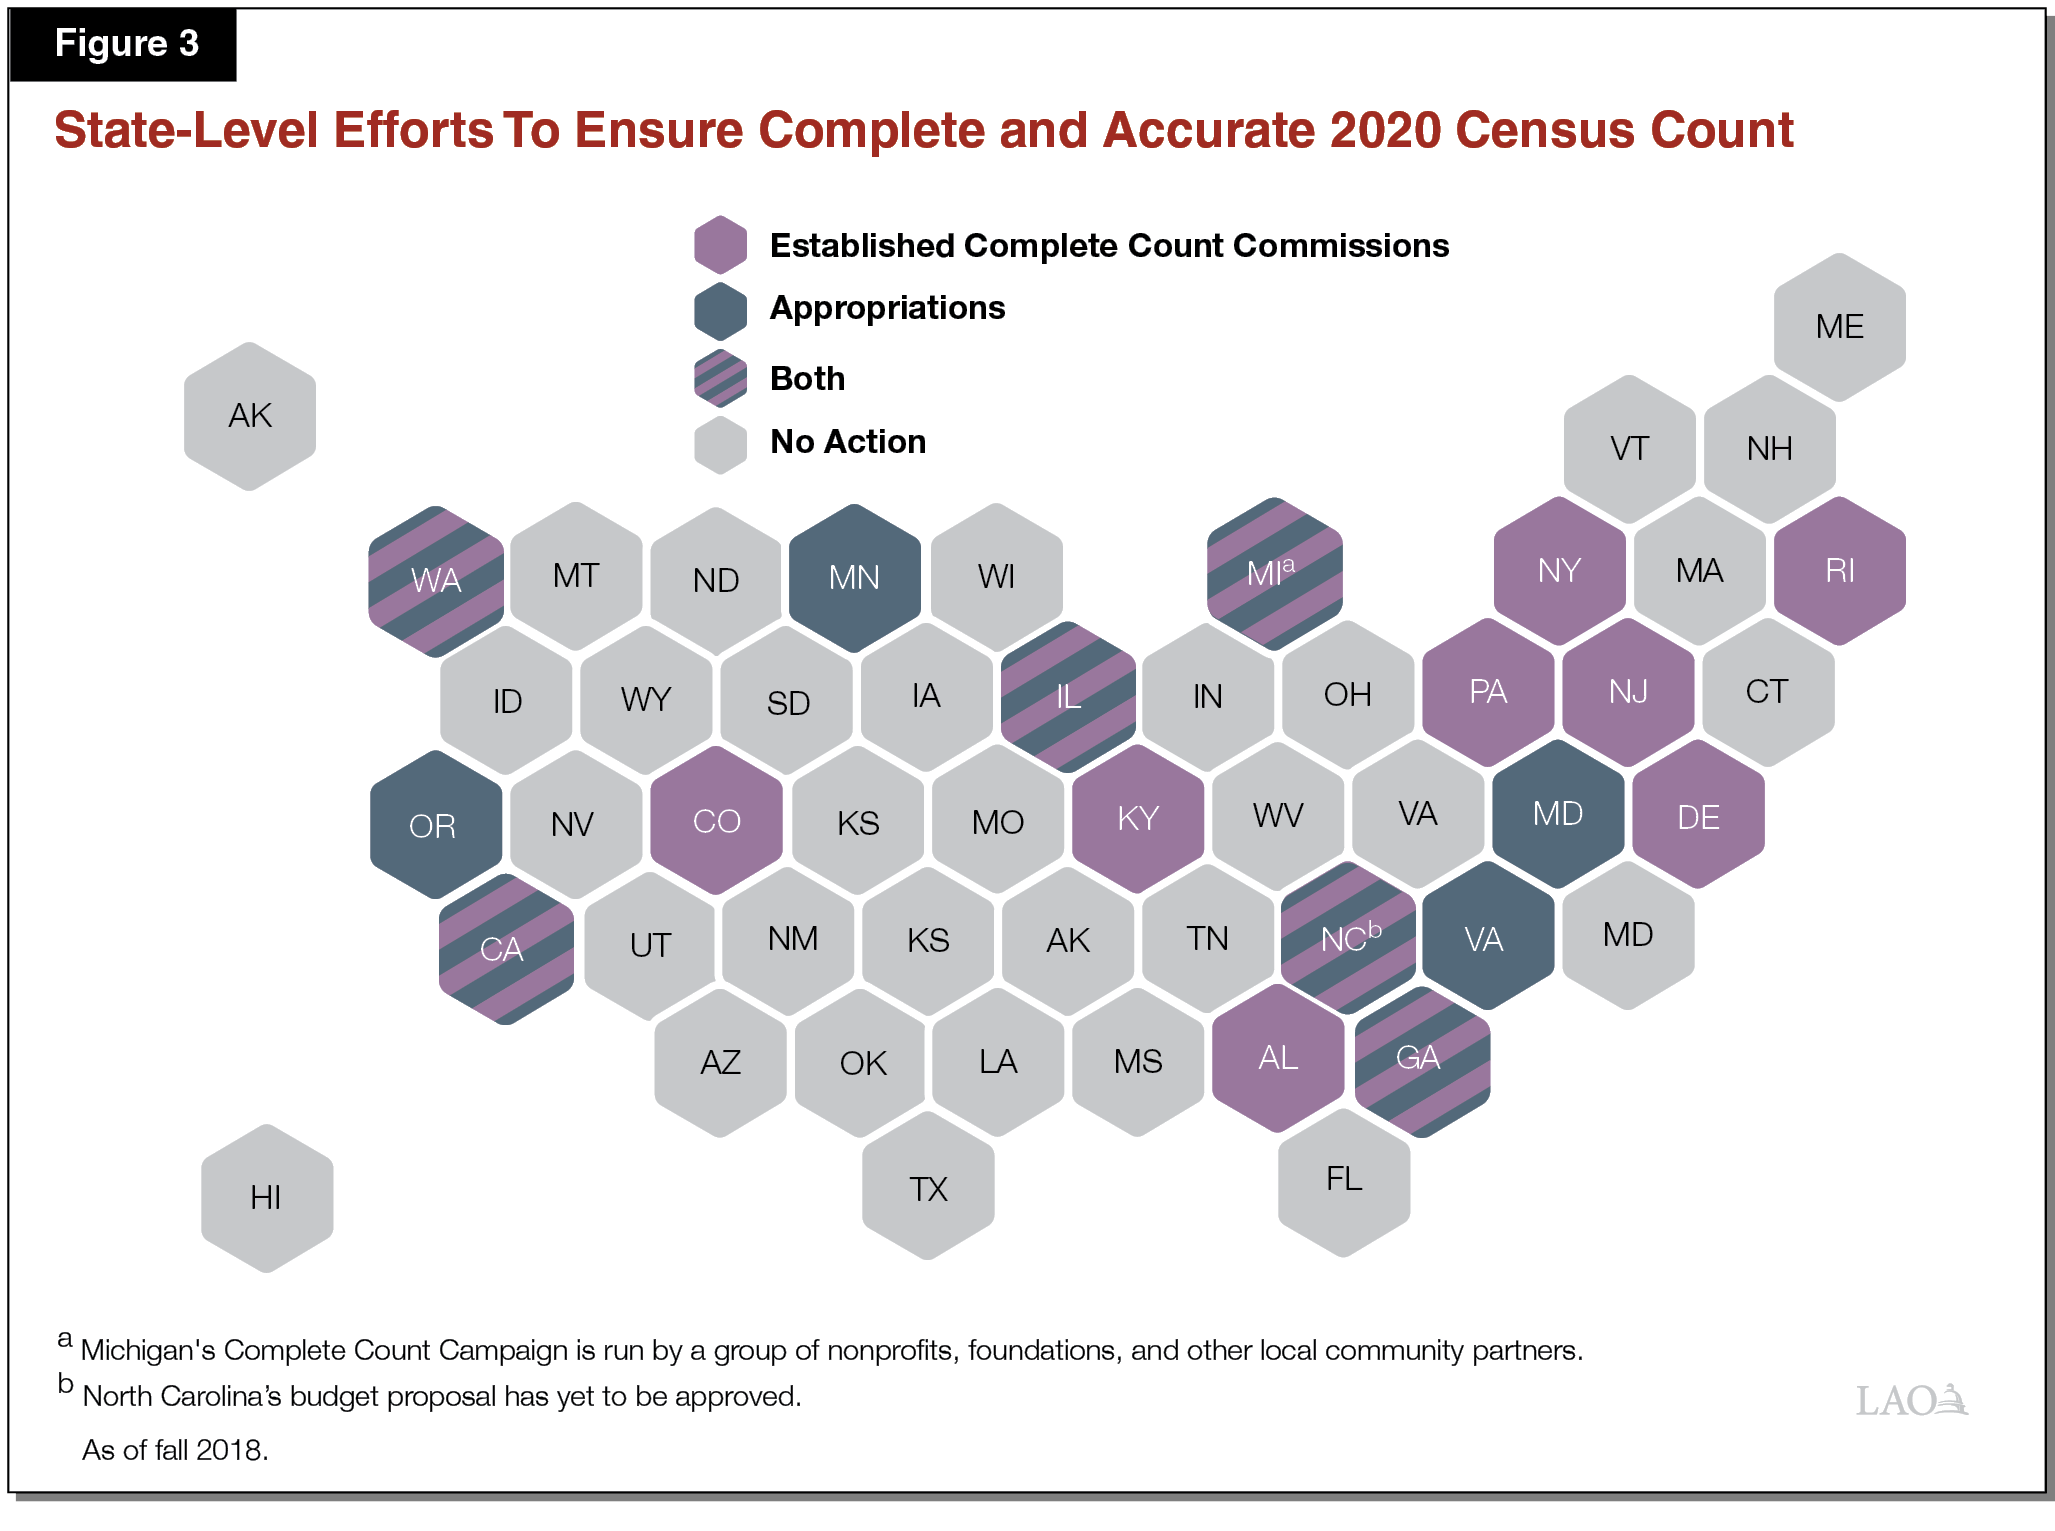 Figure 3 - State-Level Efforts To Ensure Complete and Accurate 2020 Census Count